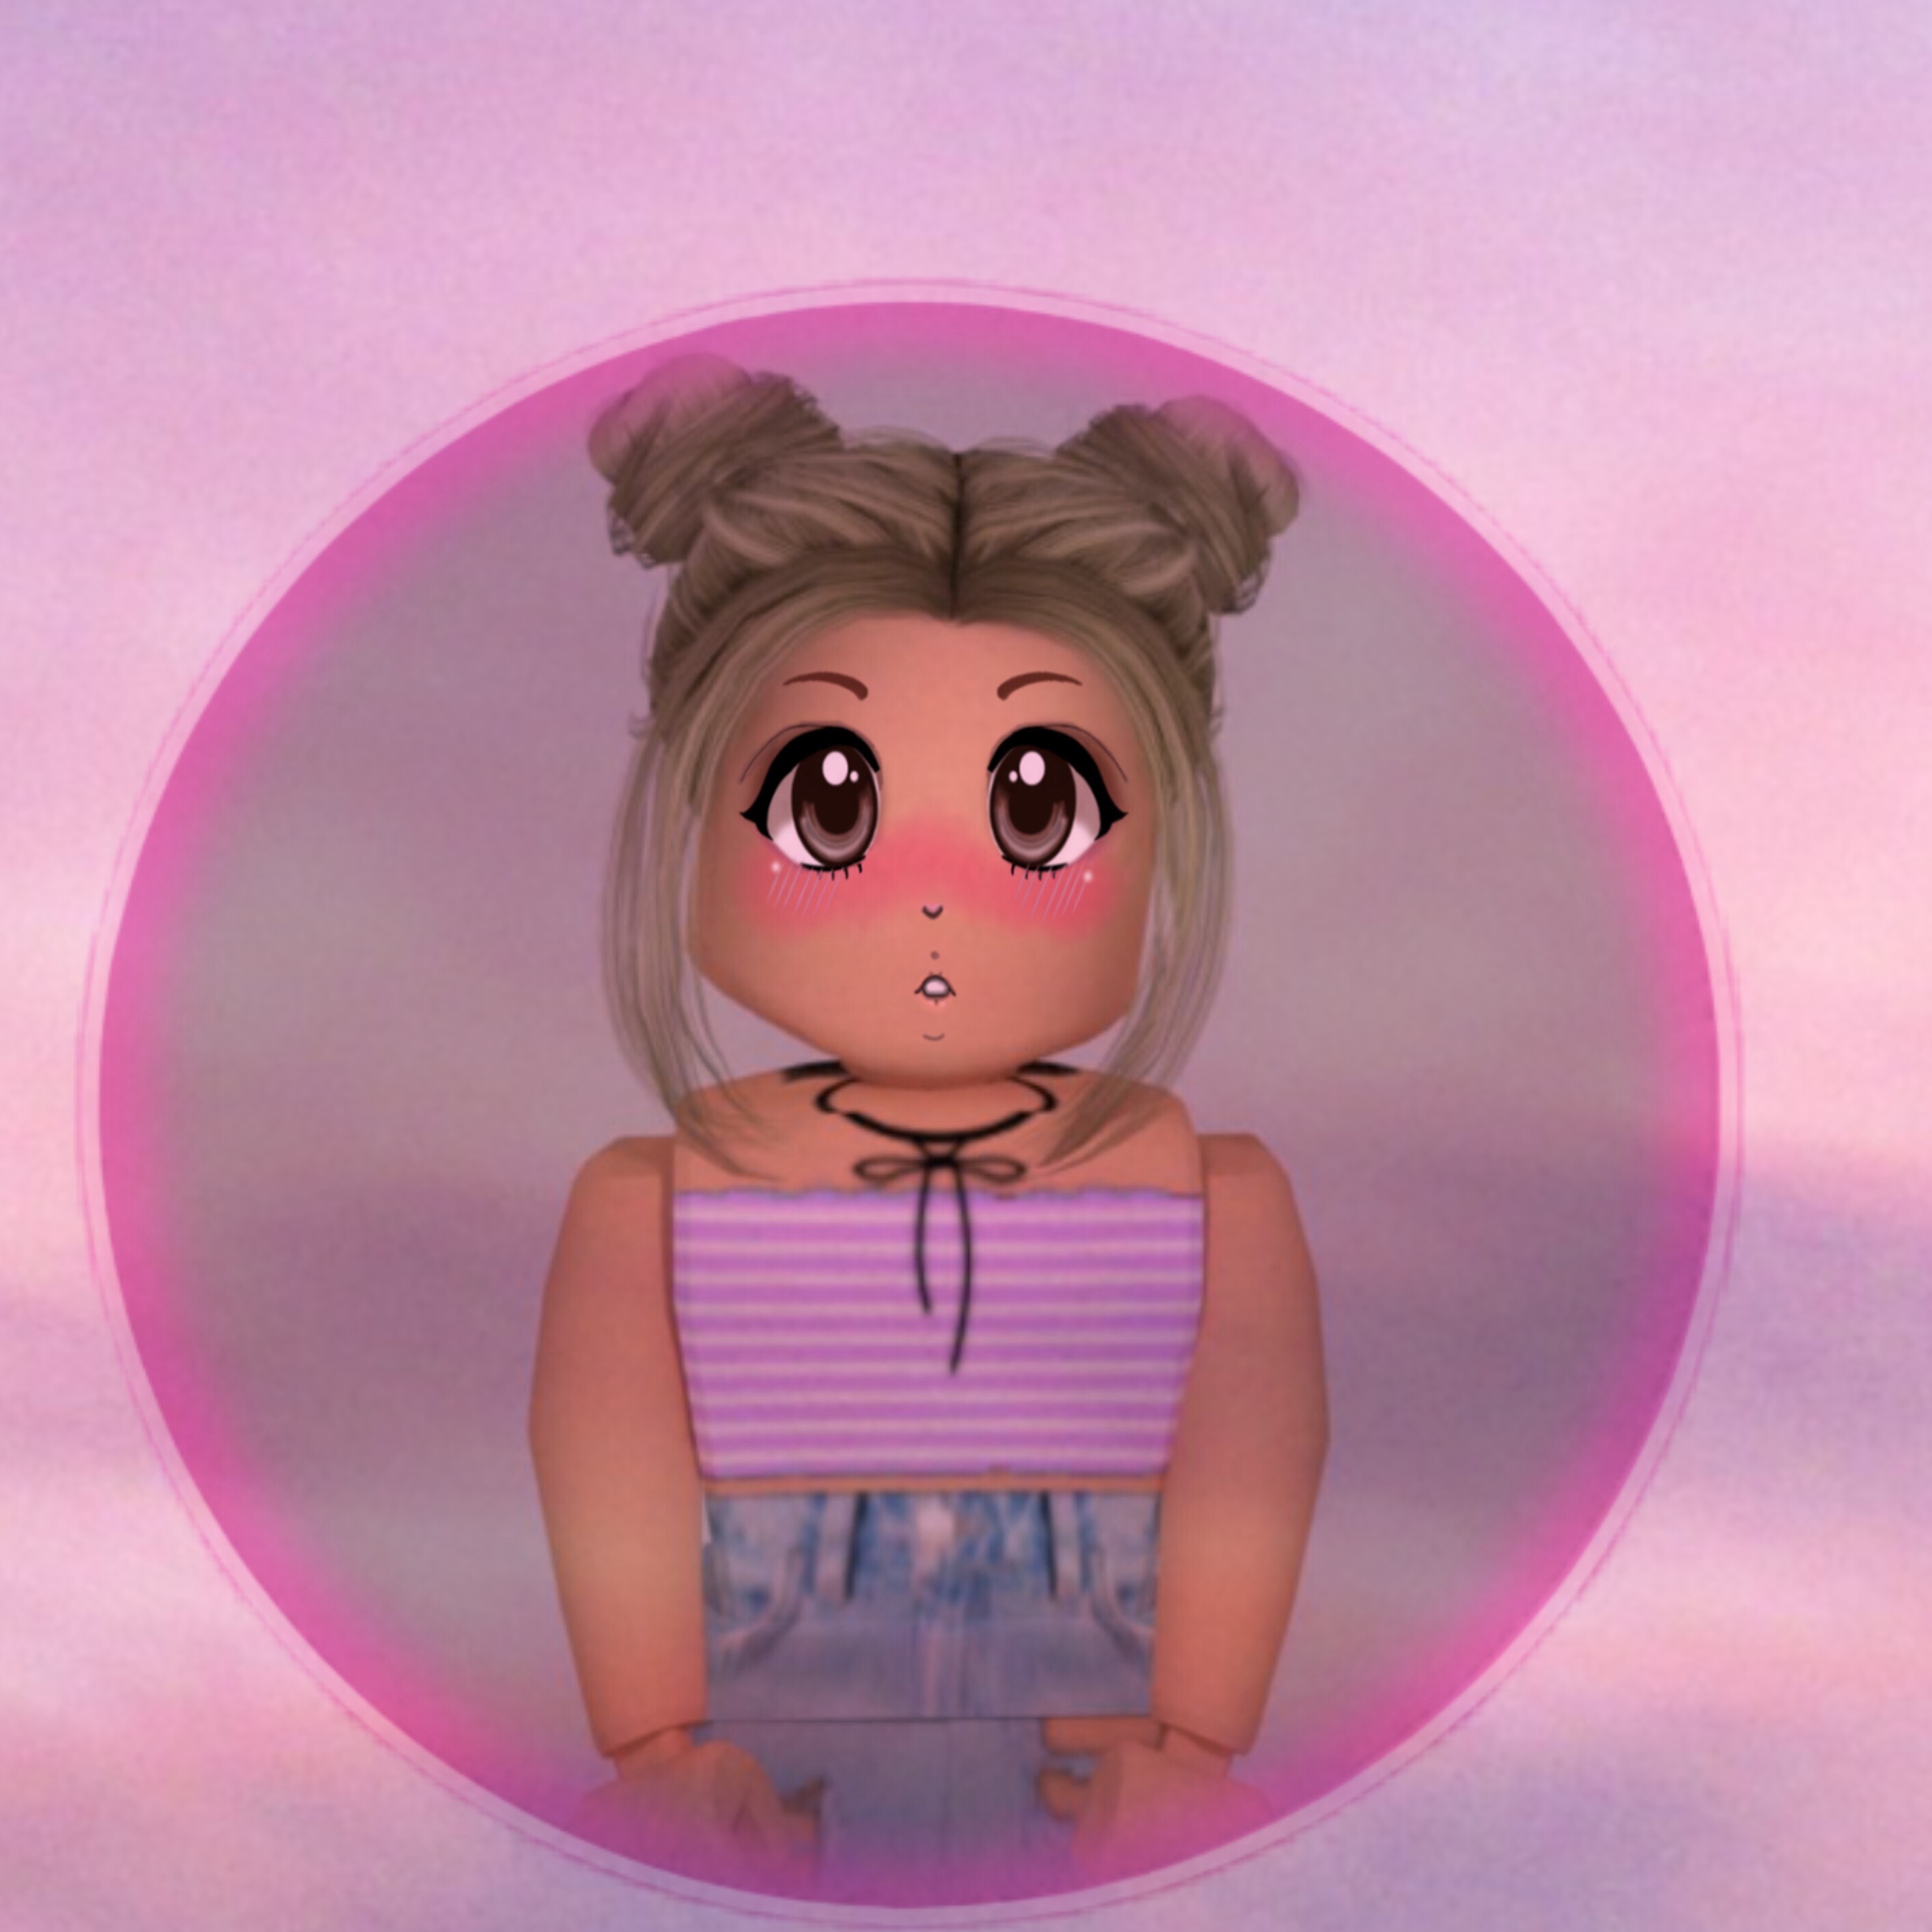 Cute Roblox Girls With No Face : My character on roblox | Roblox